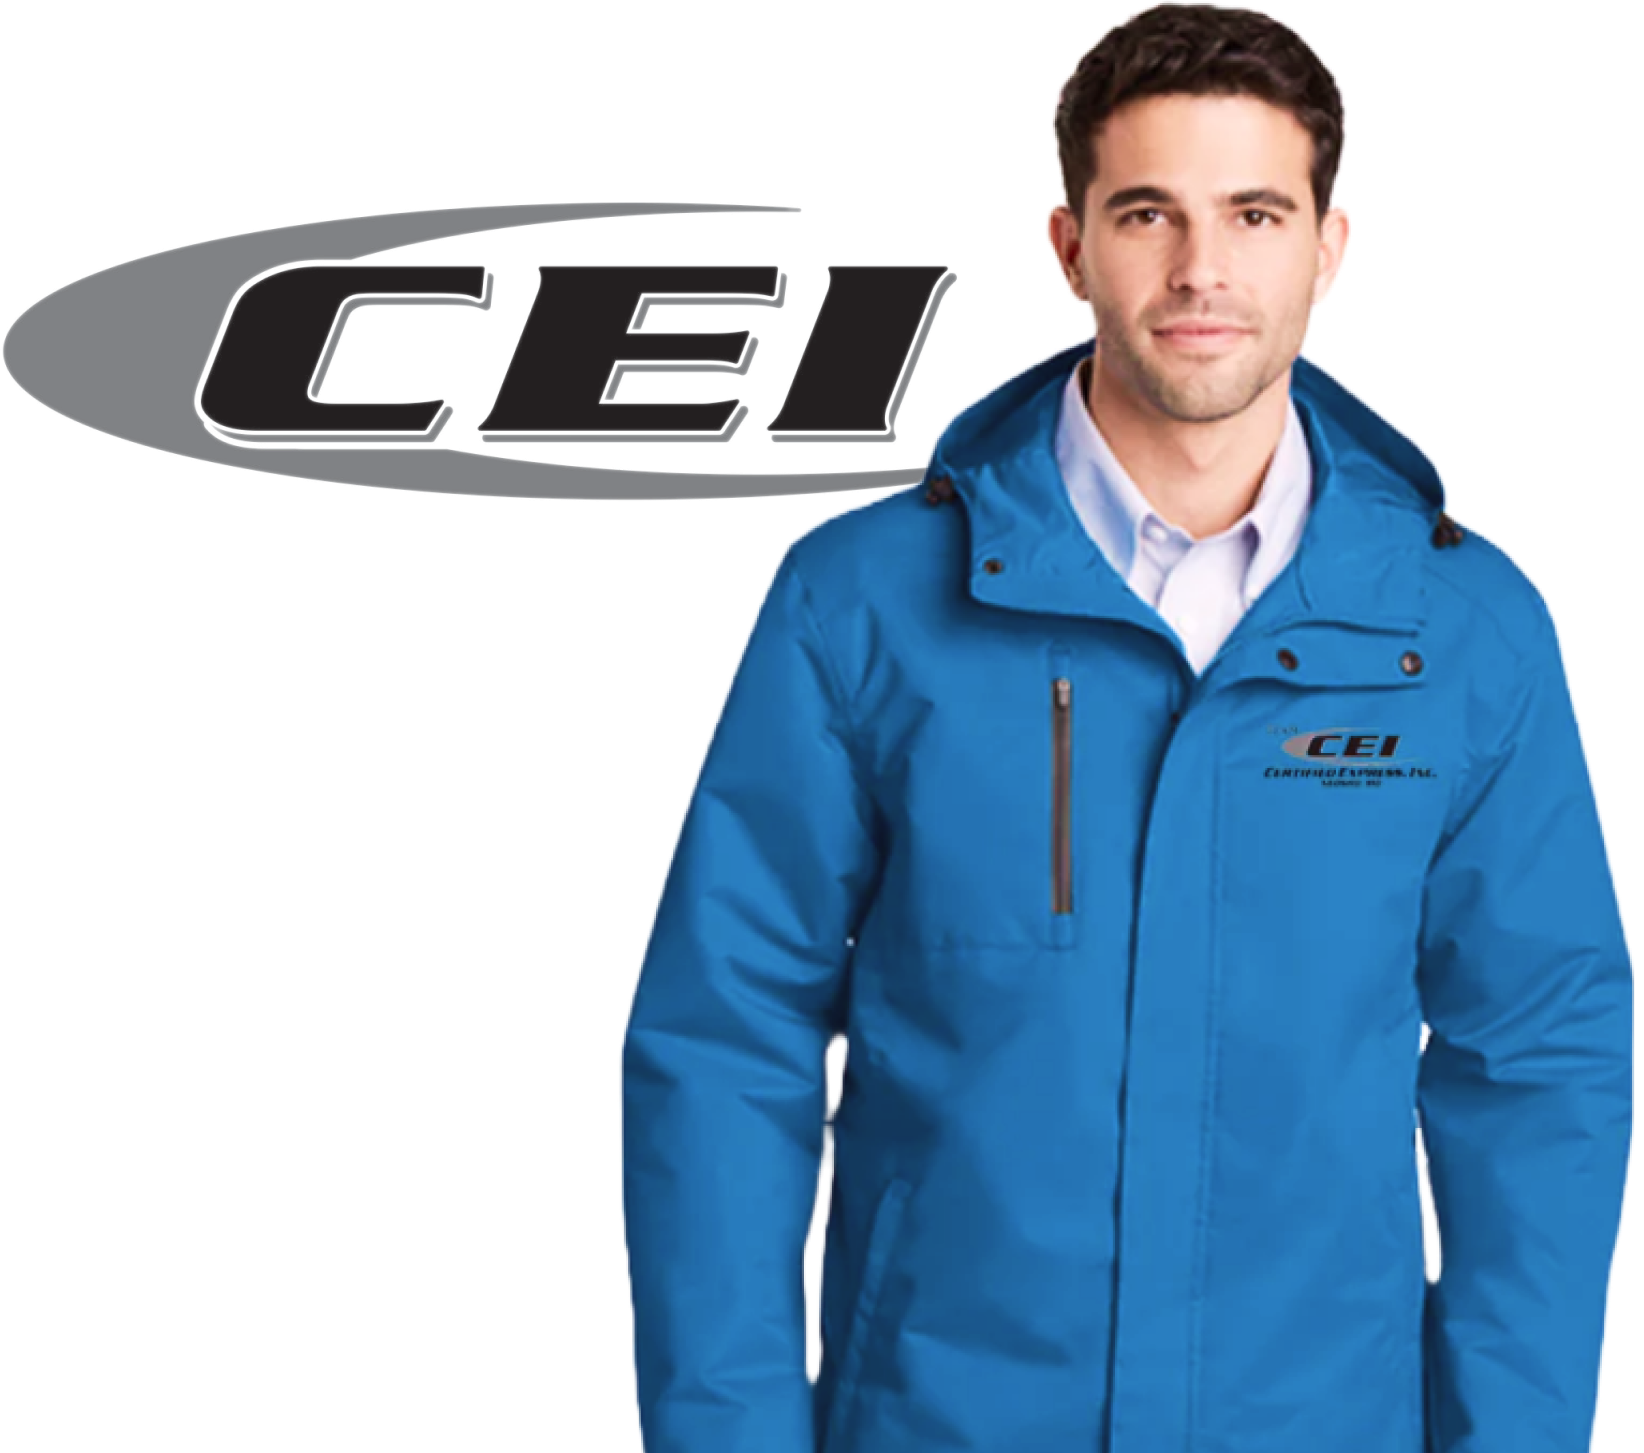 Model poses for a photo wearing a CEI windbreaker in front of the CEI logo.